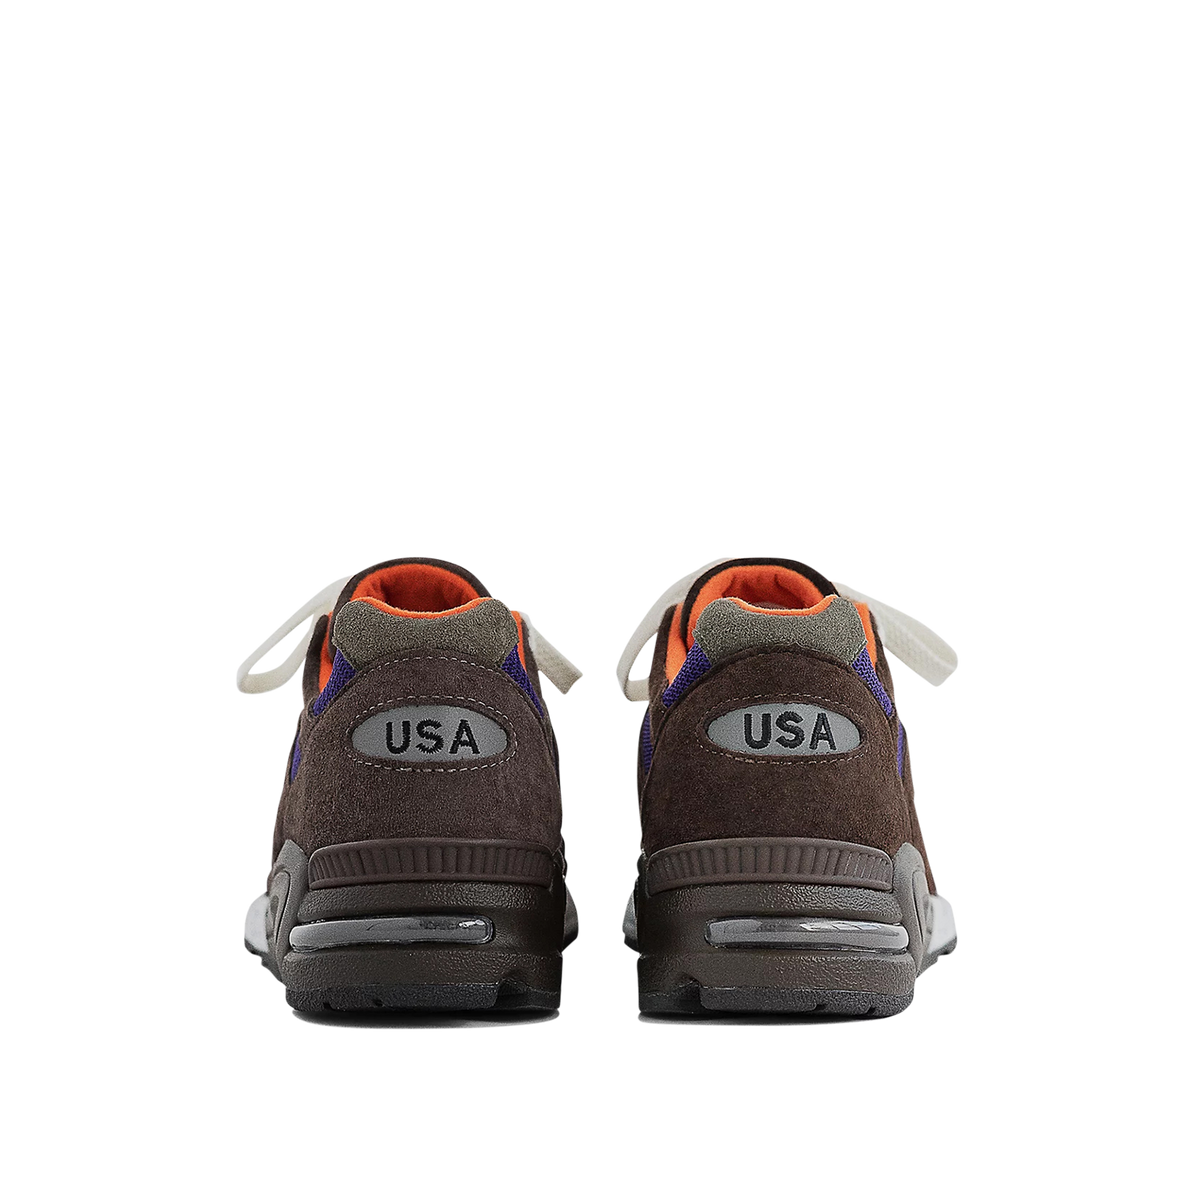 990v2 MADE in USA - Brown with Grey